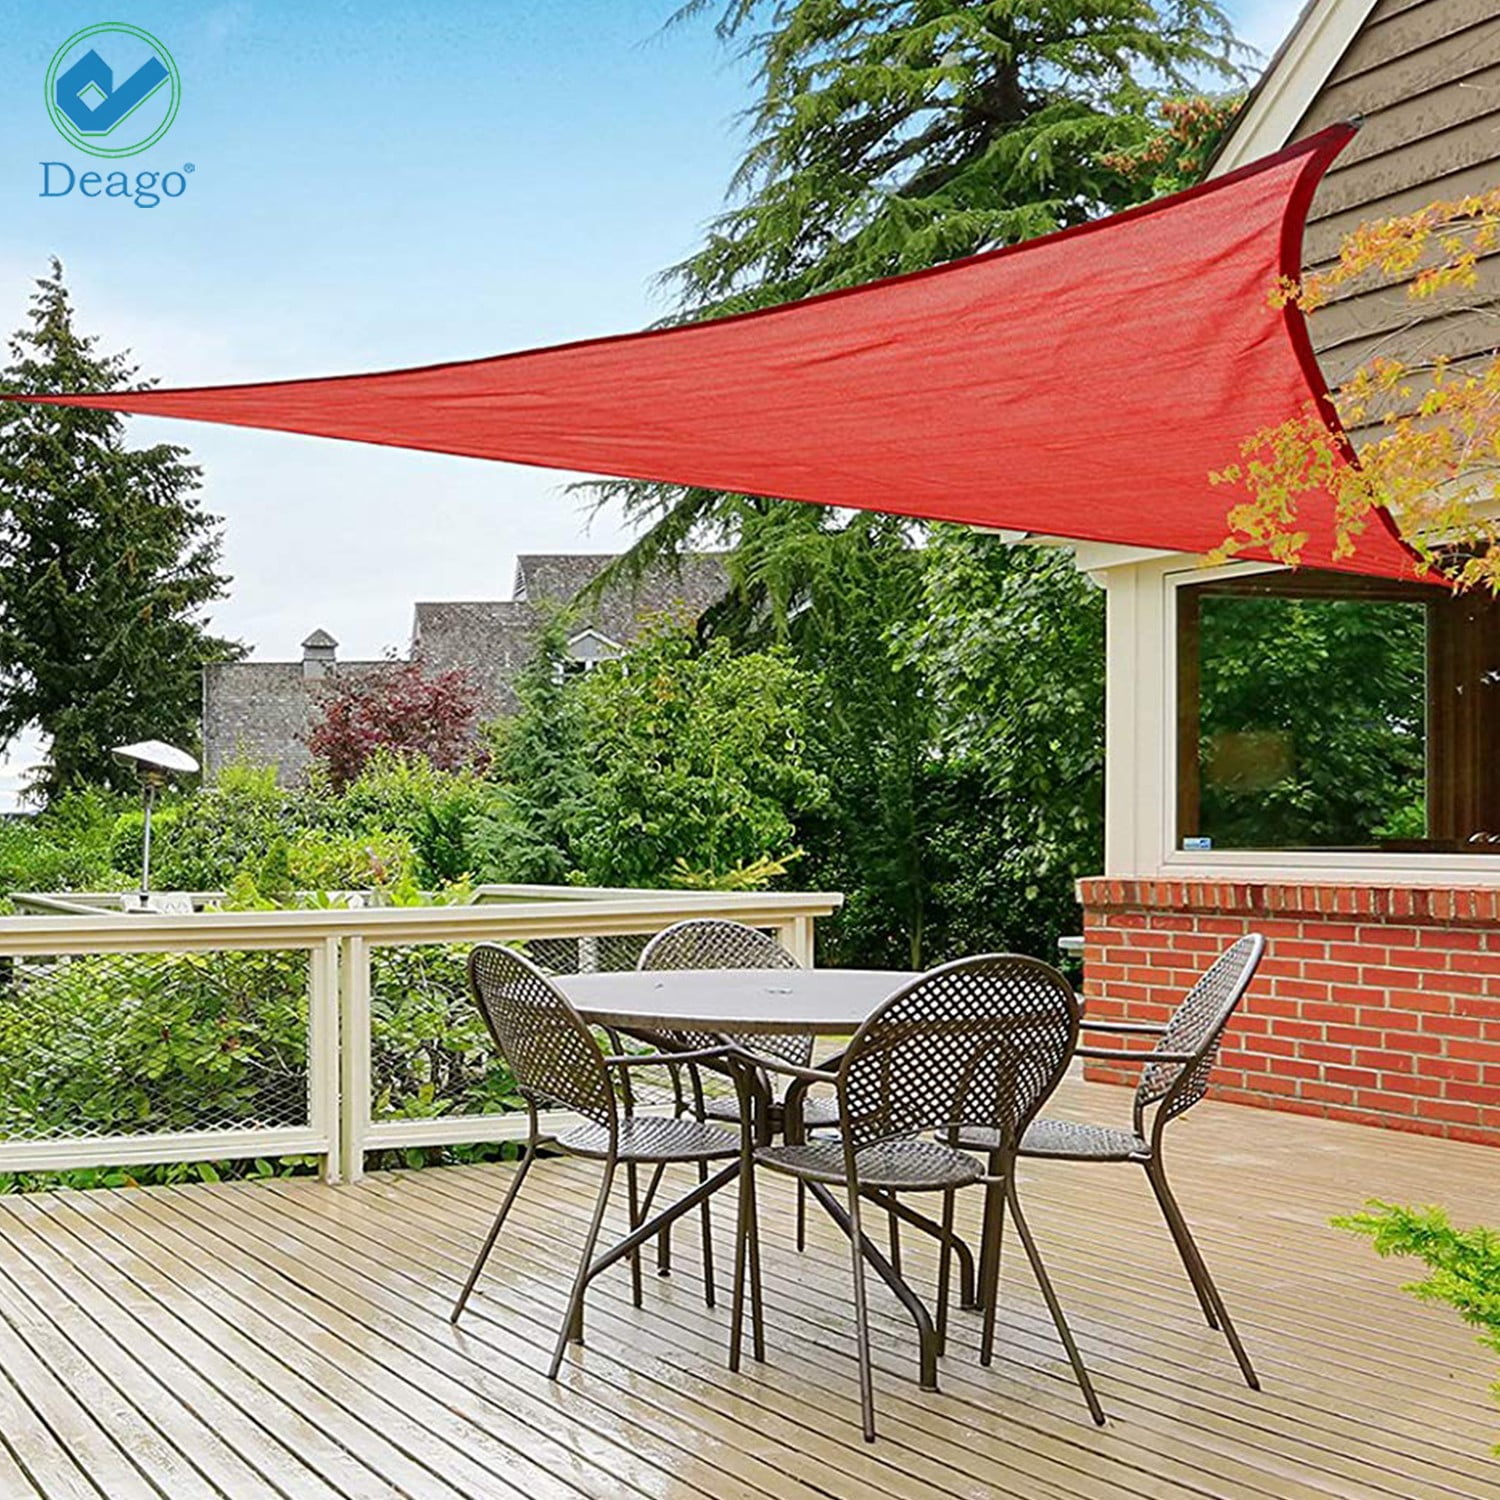 Outdoor Triangle Sun Shade Sail Top Canopy Patio Lawn Cover UV Block Waterproof 